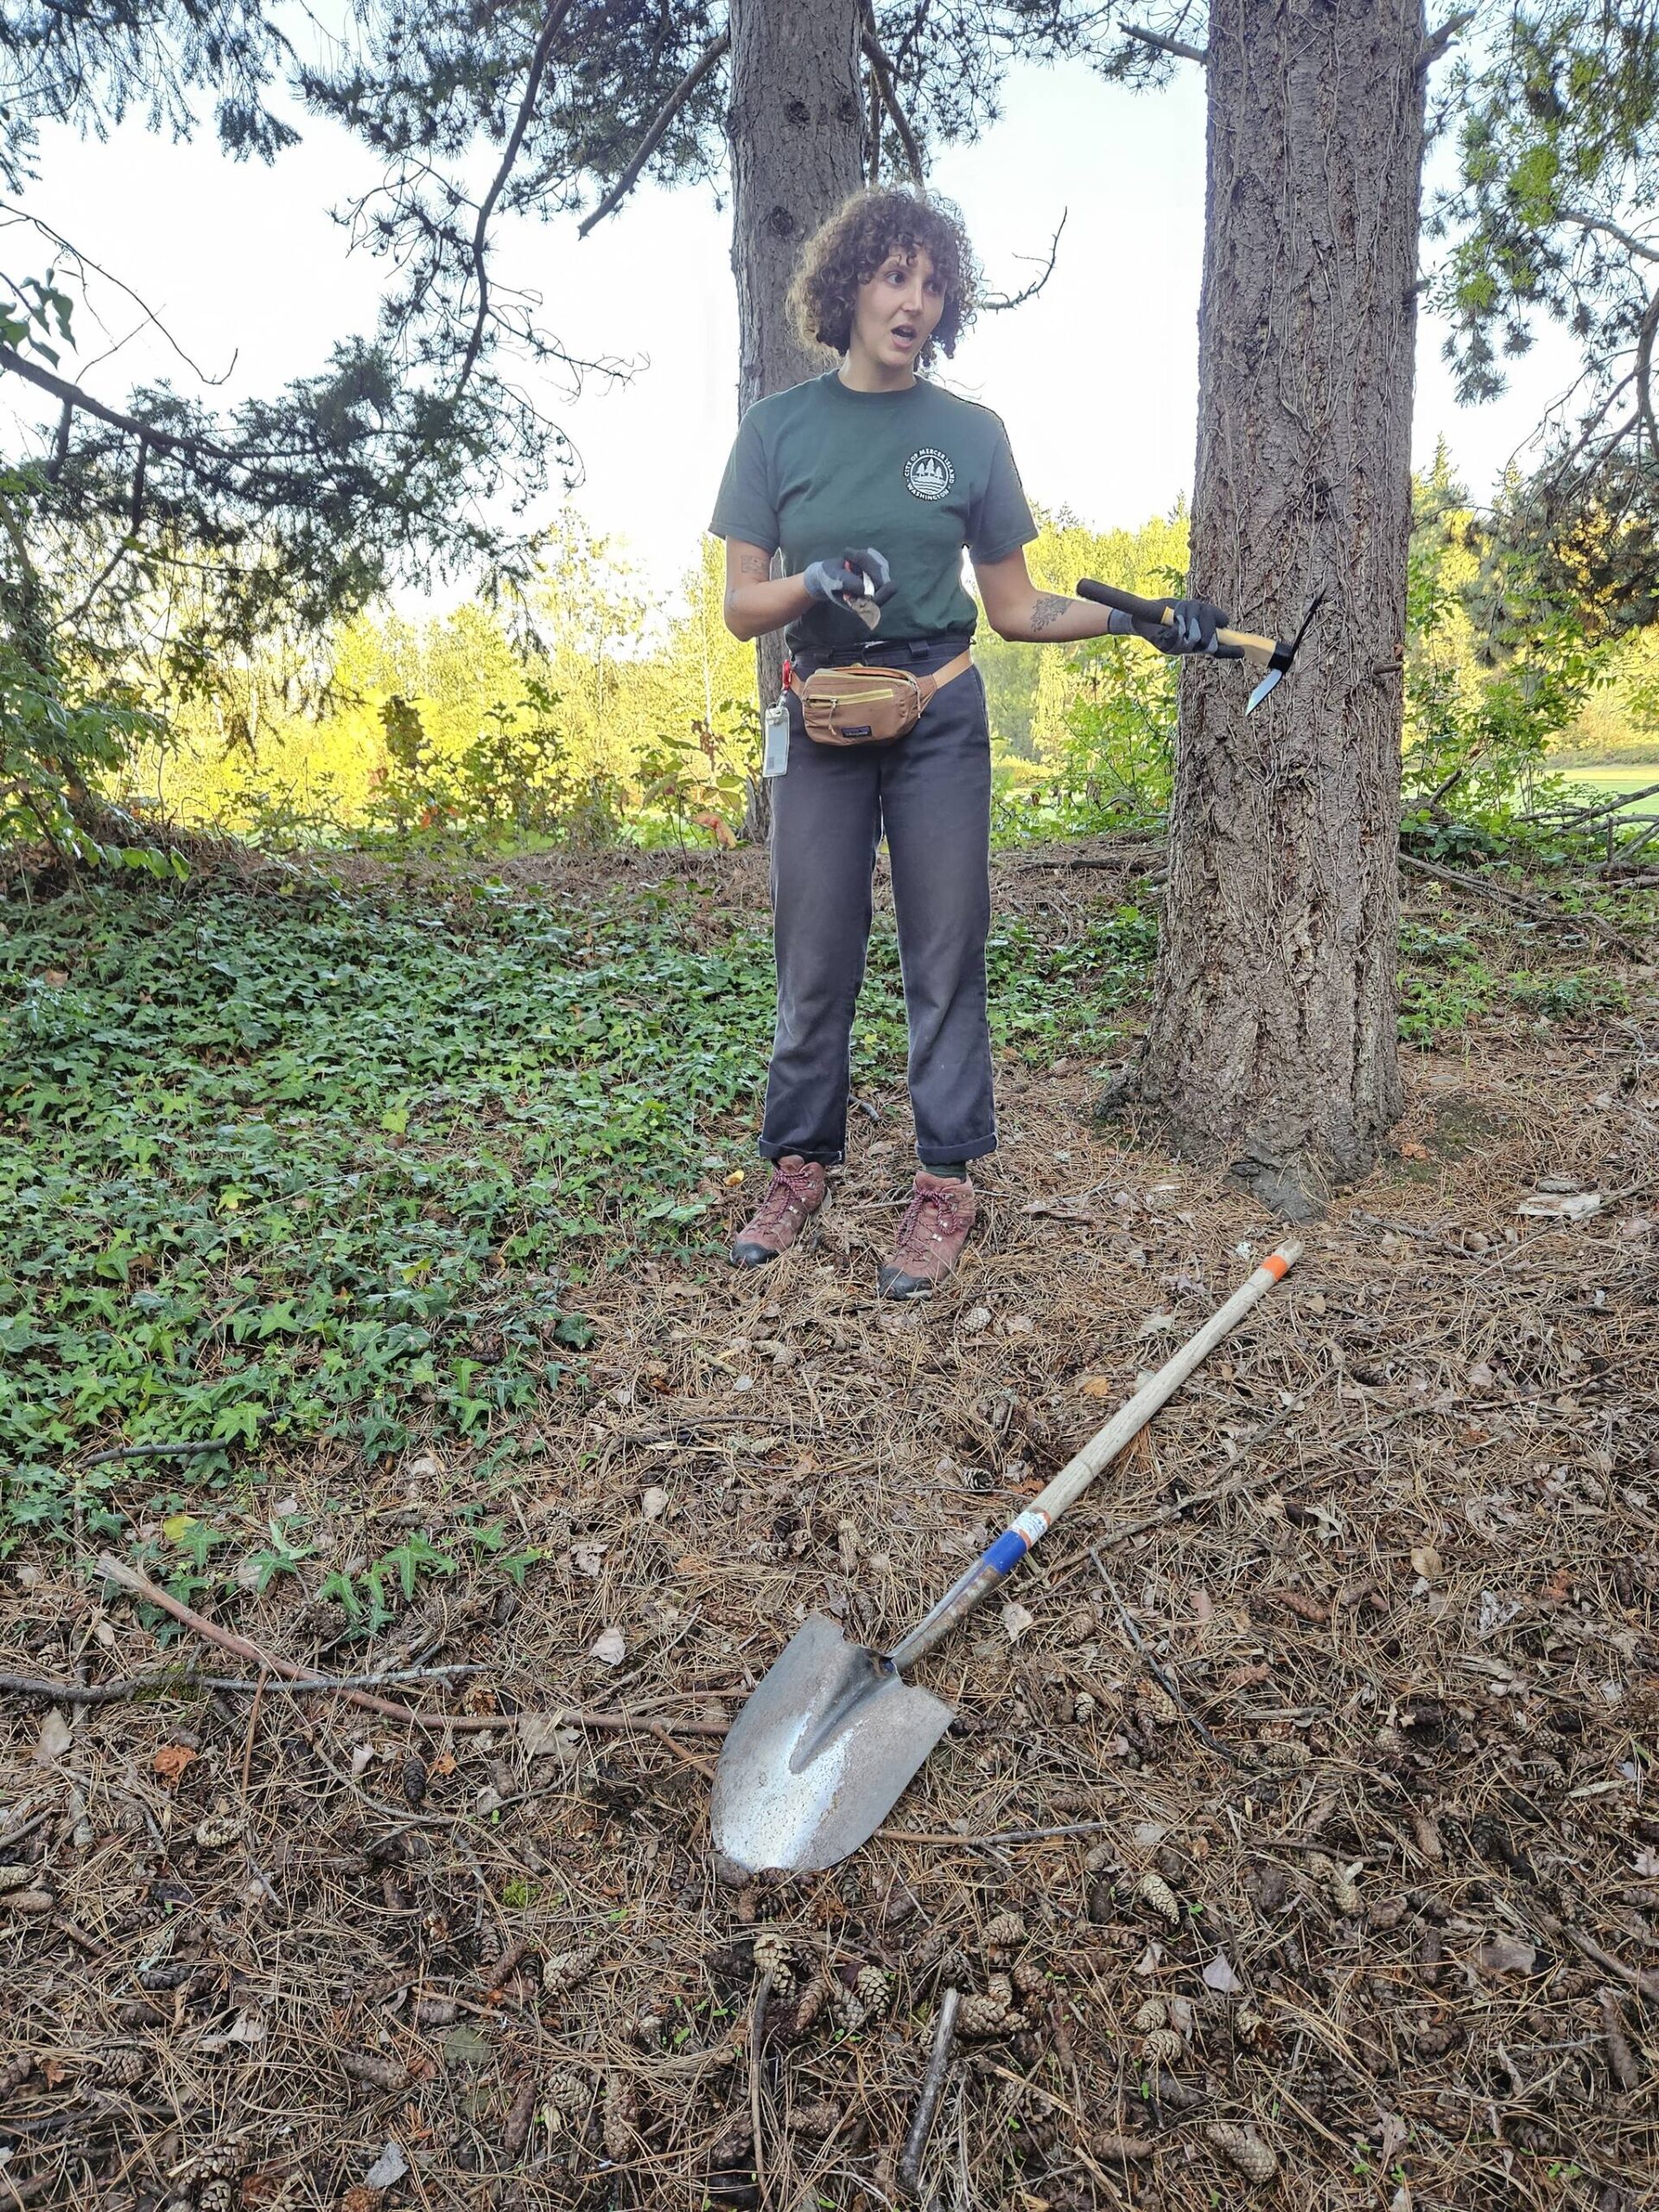 Courtesy photo
Jordan Fisher of the city’s Parks and Recreation Department demonstrates best tools for removing ivy.